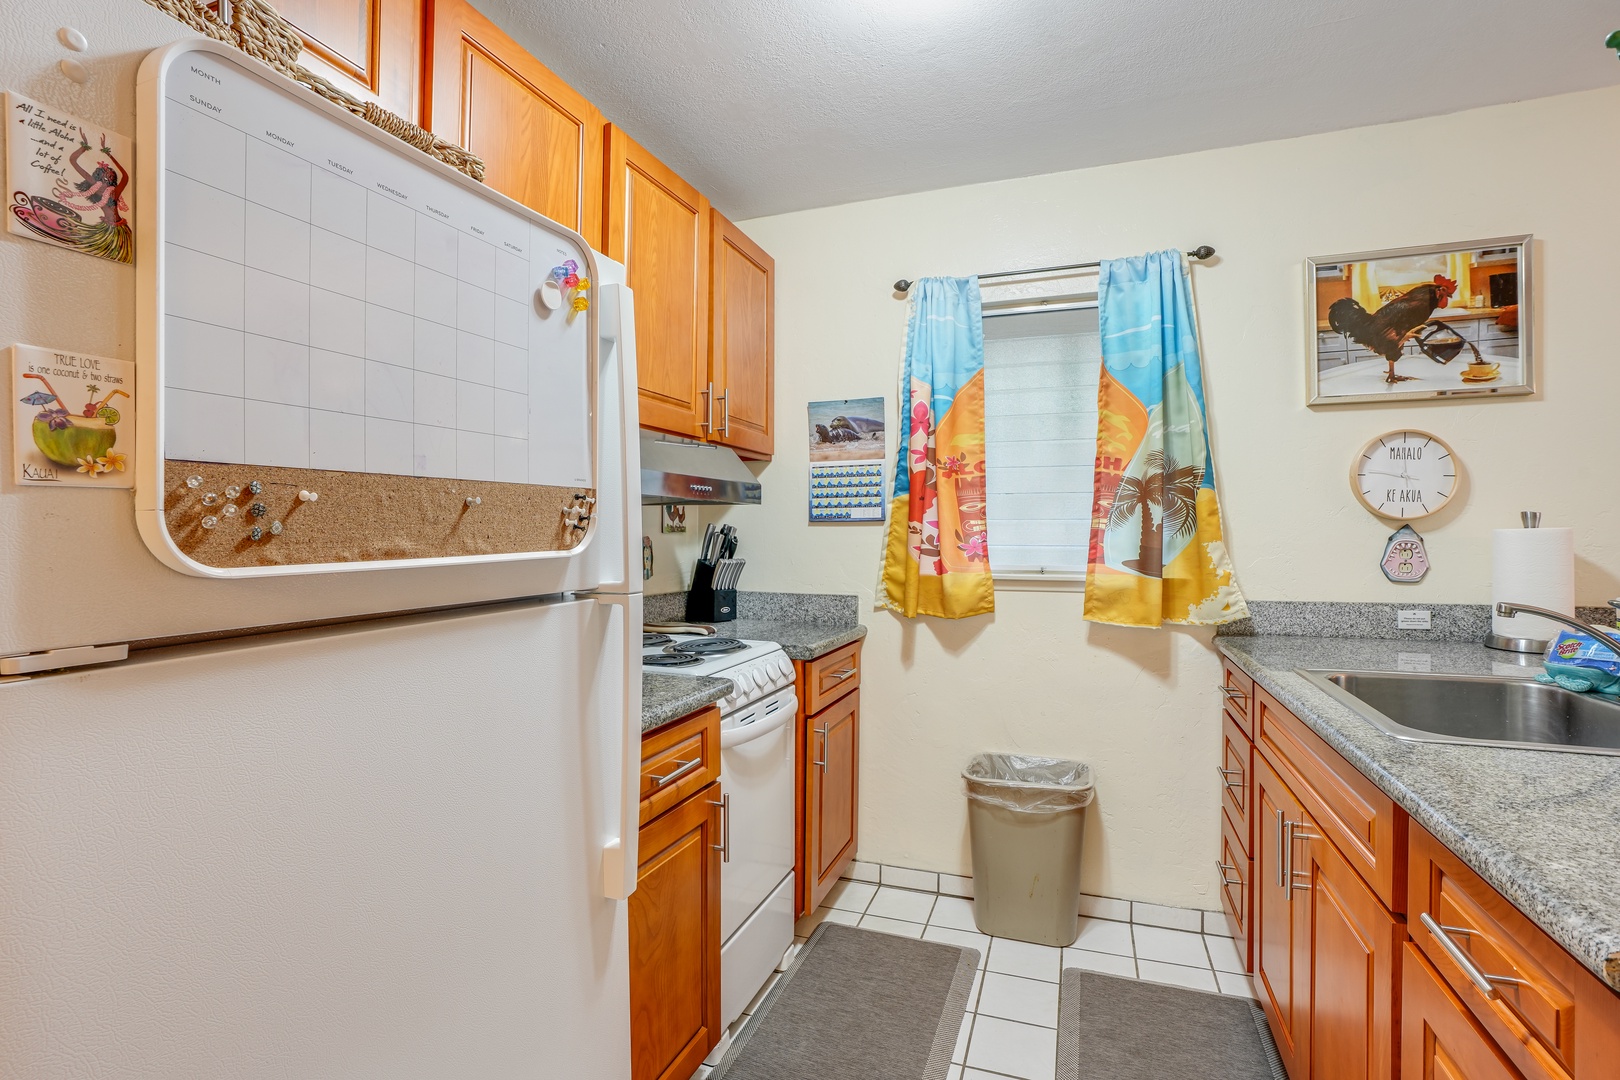 Kapaa Vacation Rentals, Nani Hale - Well equipped kitchen for meal preperation